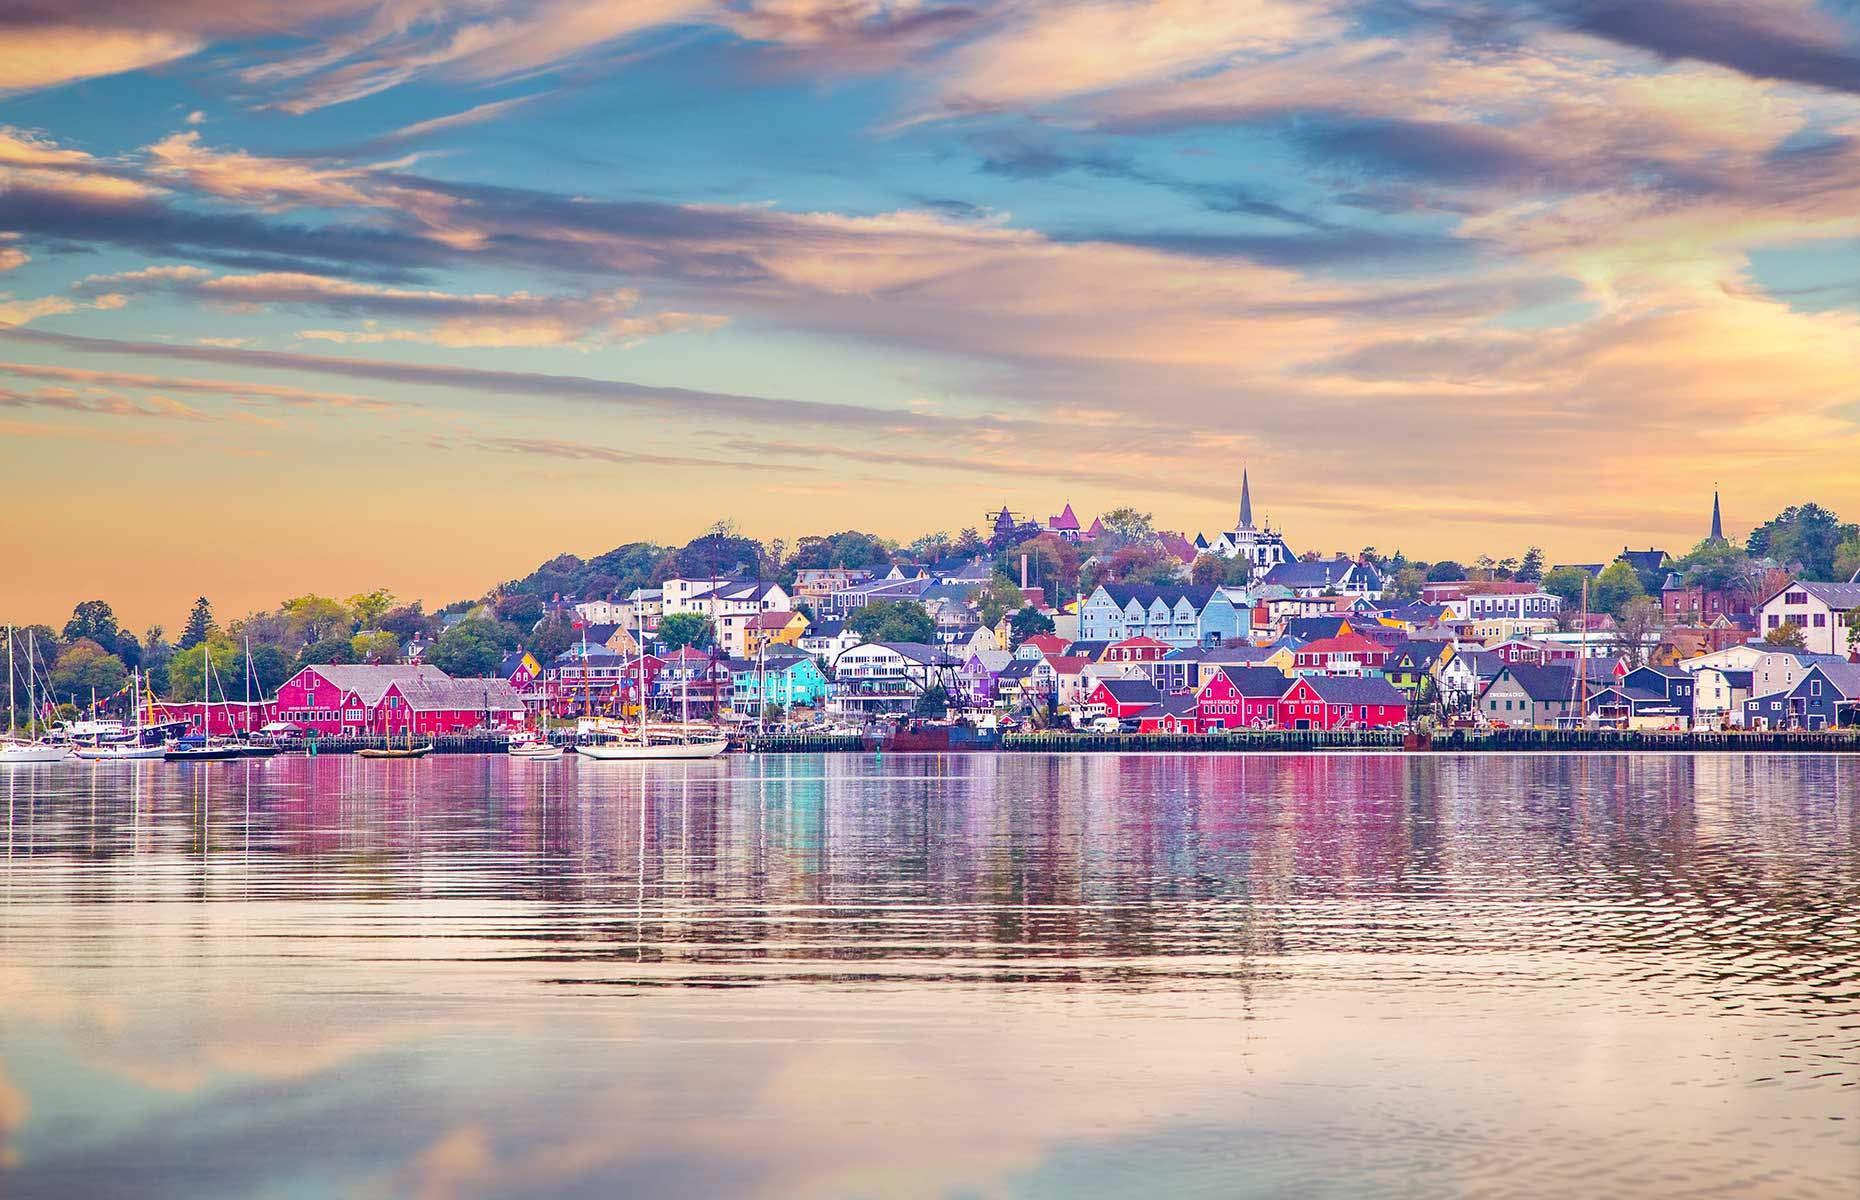 Escape to Canada's most gorgeous coastal towns and villages